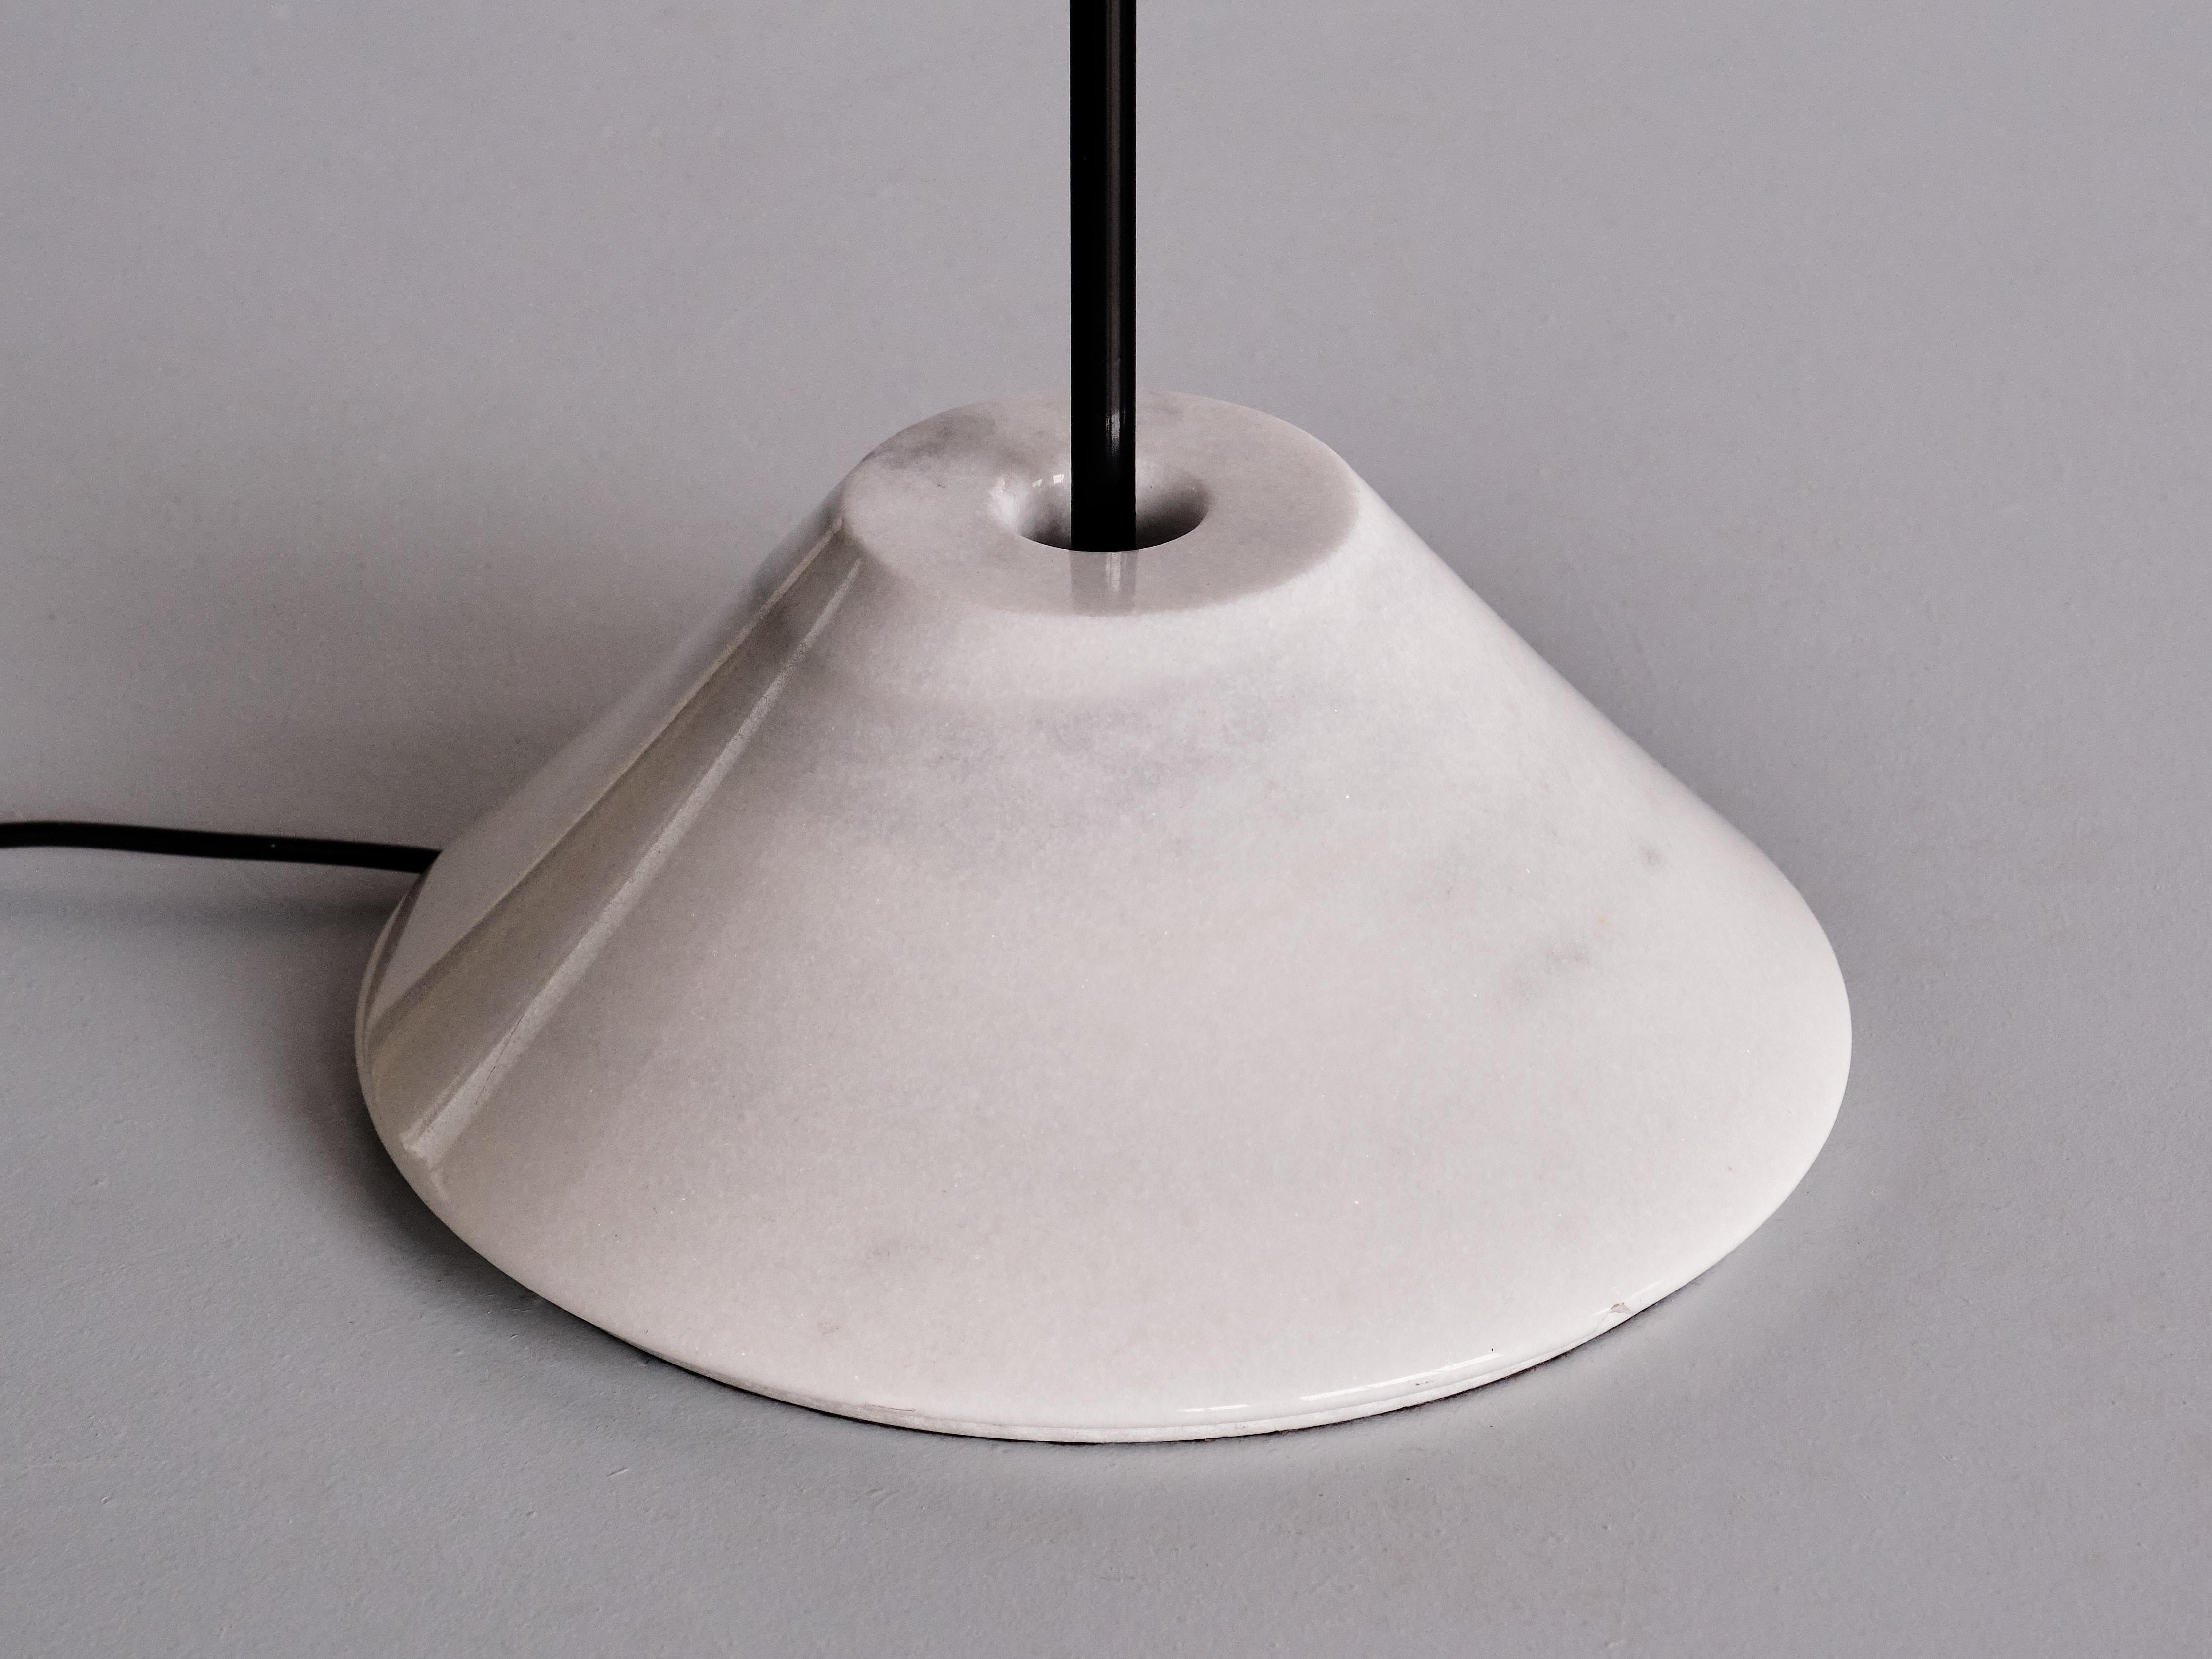 Vico Magistretti 'Snow' Floor Lamp in Metal and Marble, Oluce, Italy, 1973 For Sale 1